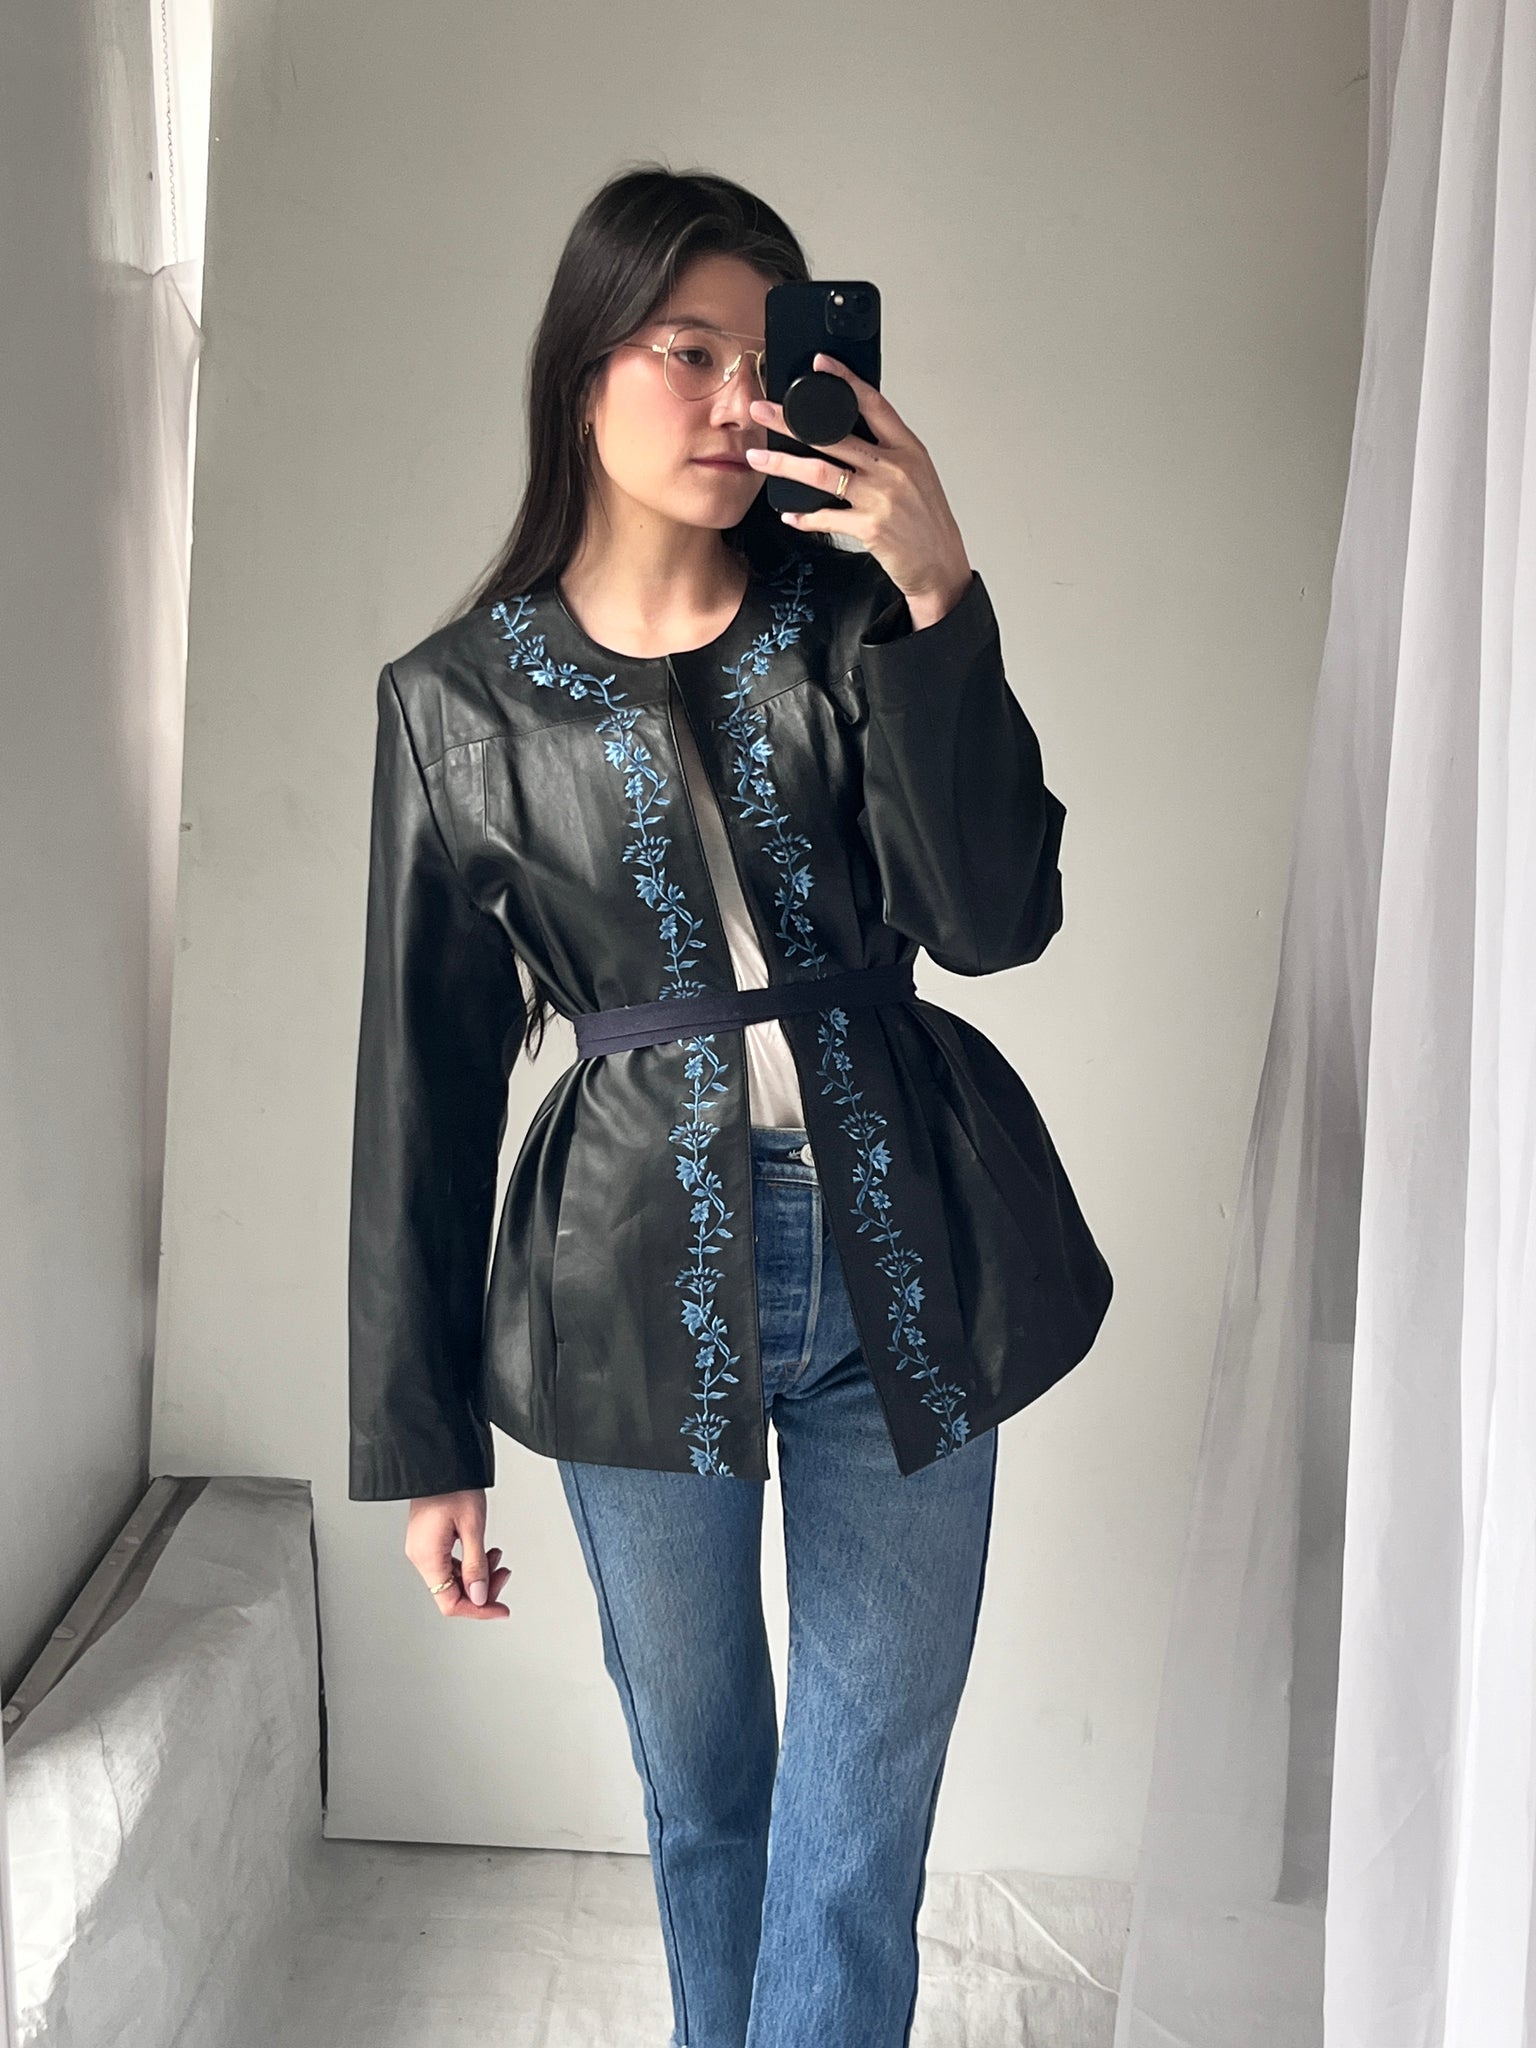 Black Leather Jacket with Blue Floral Embroidery